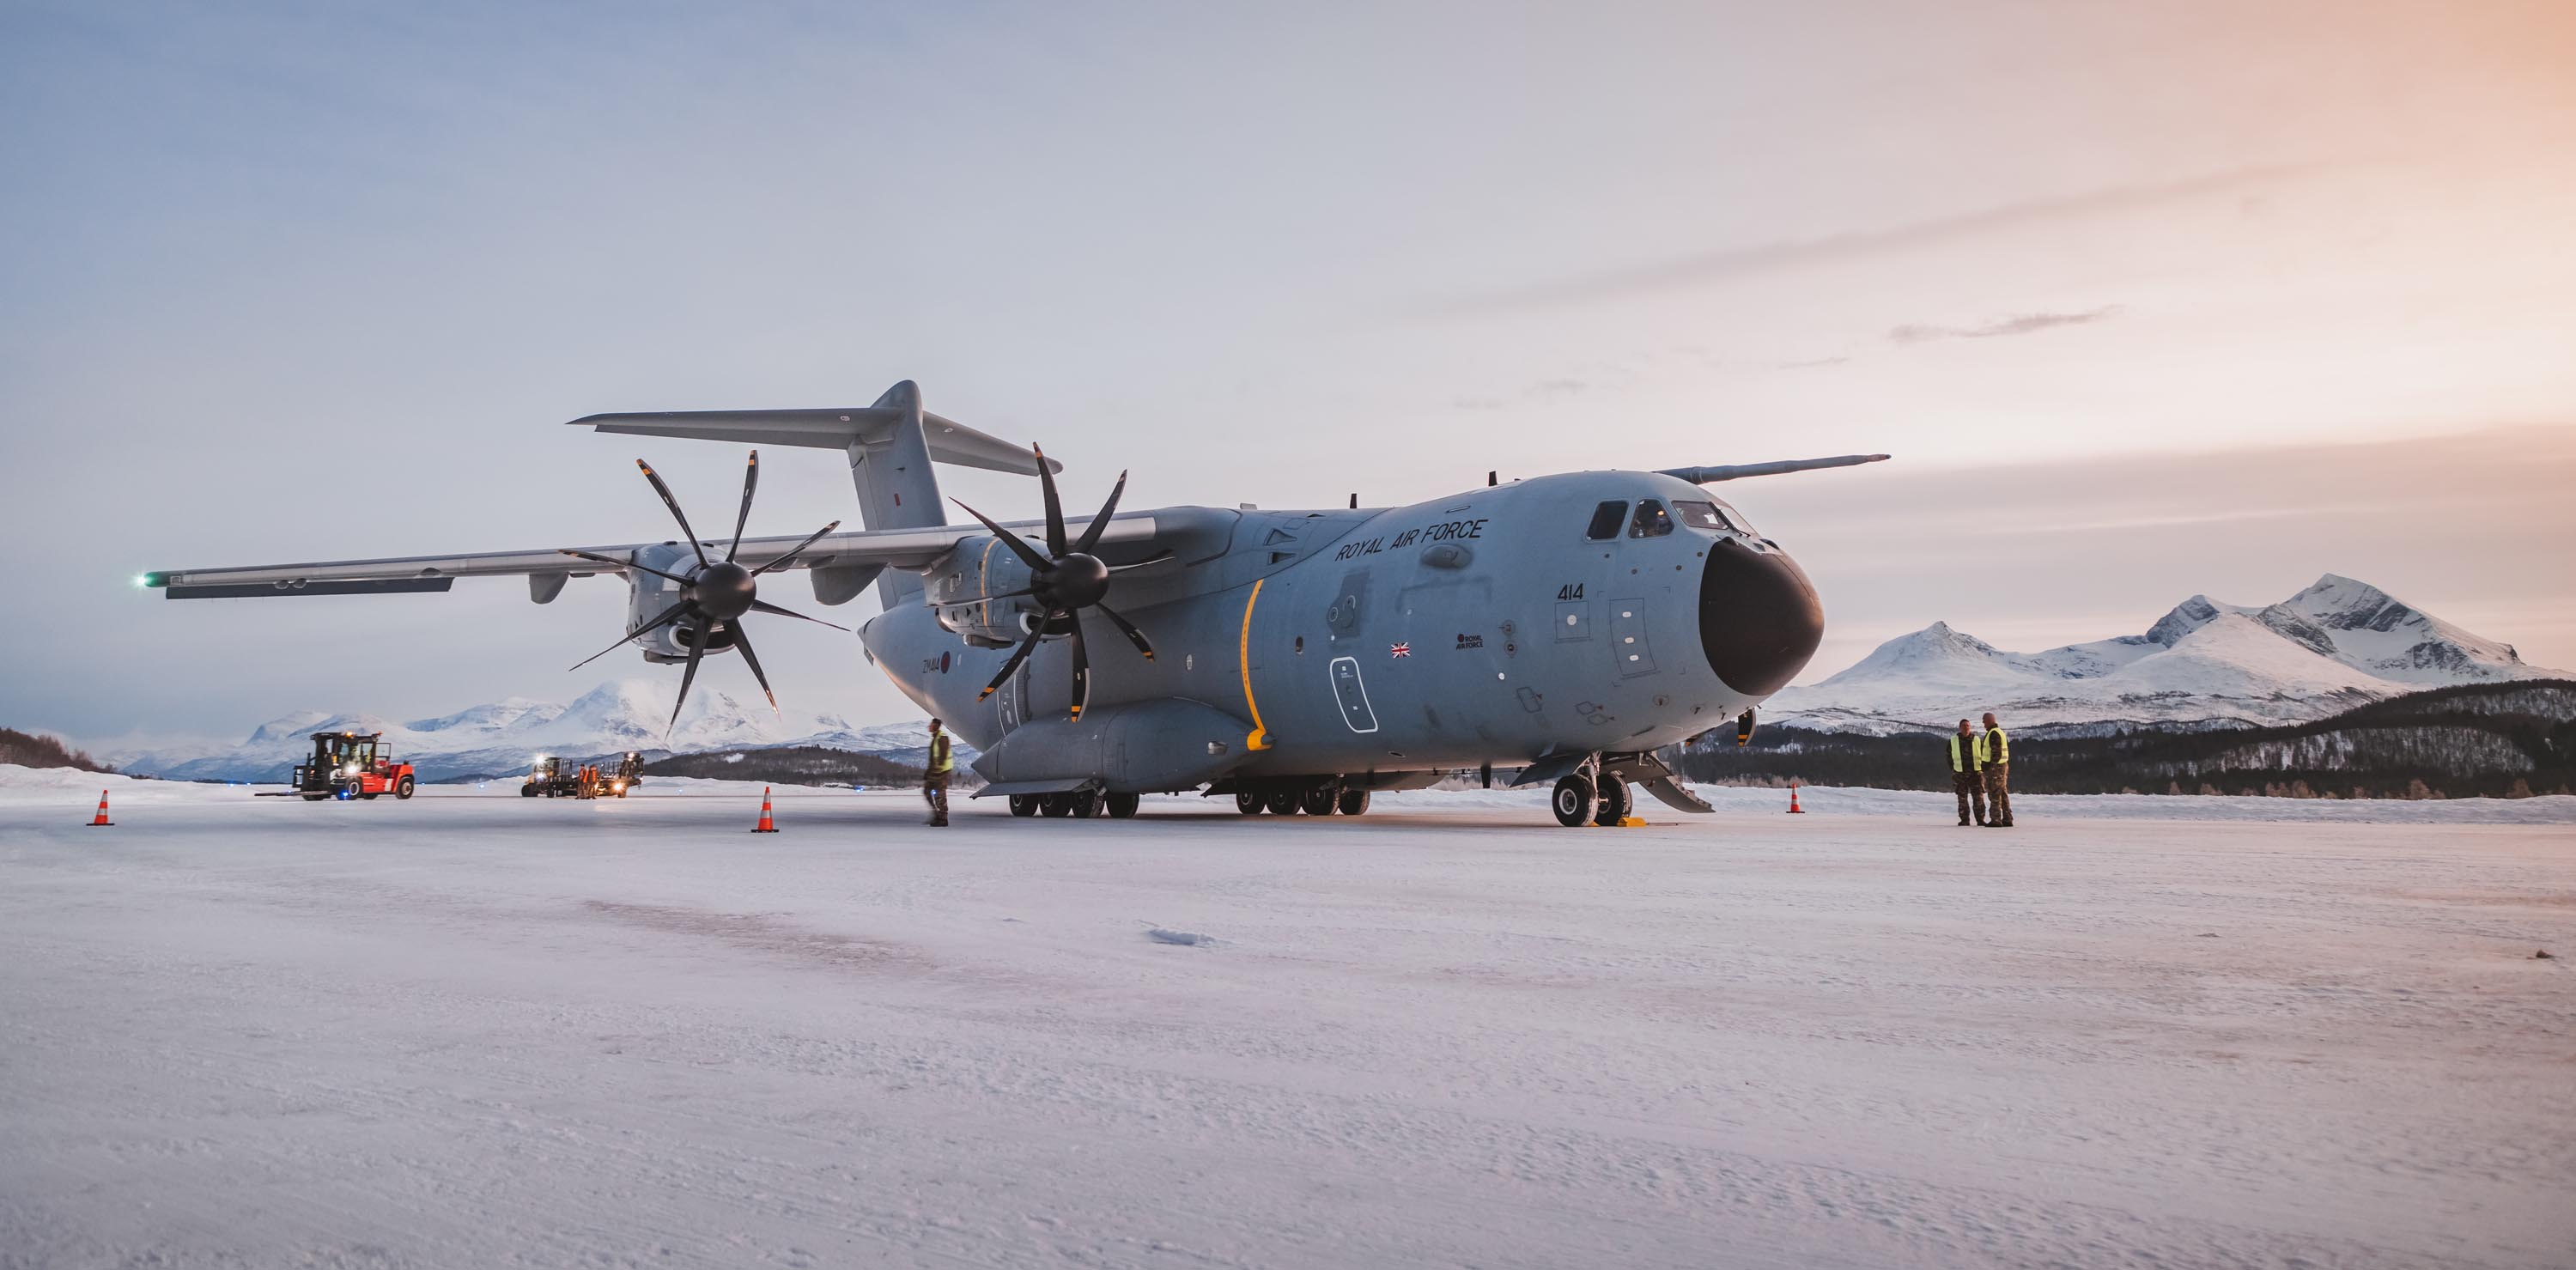 Image shows RAF Atlas on a snowy airfield.